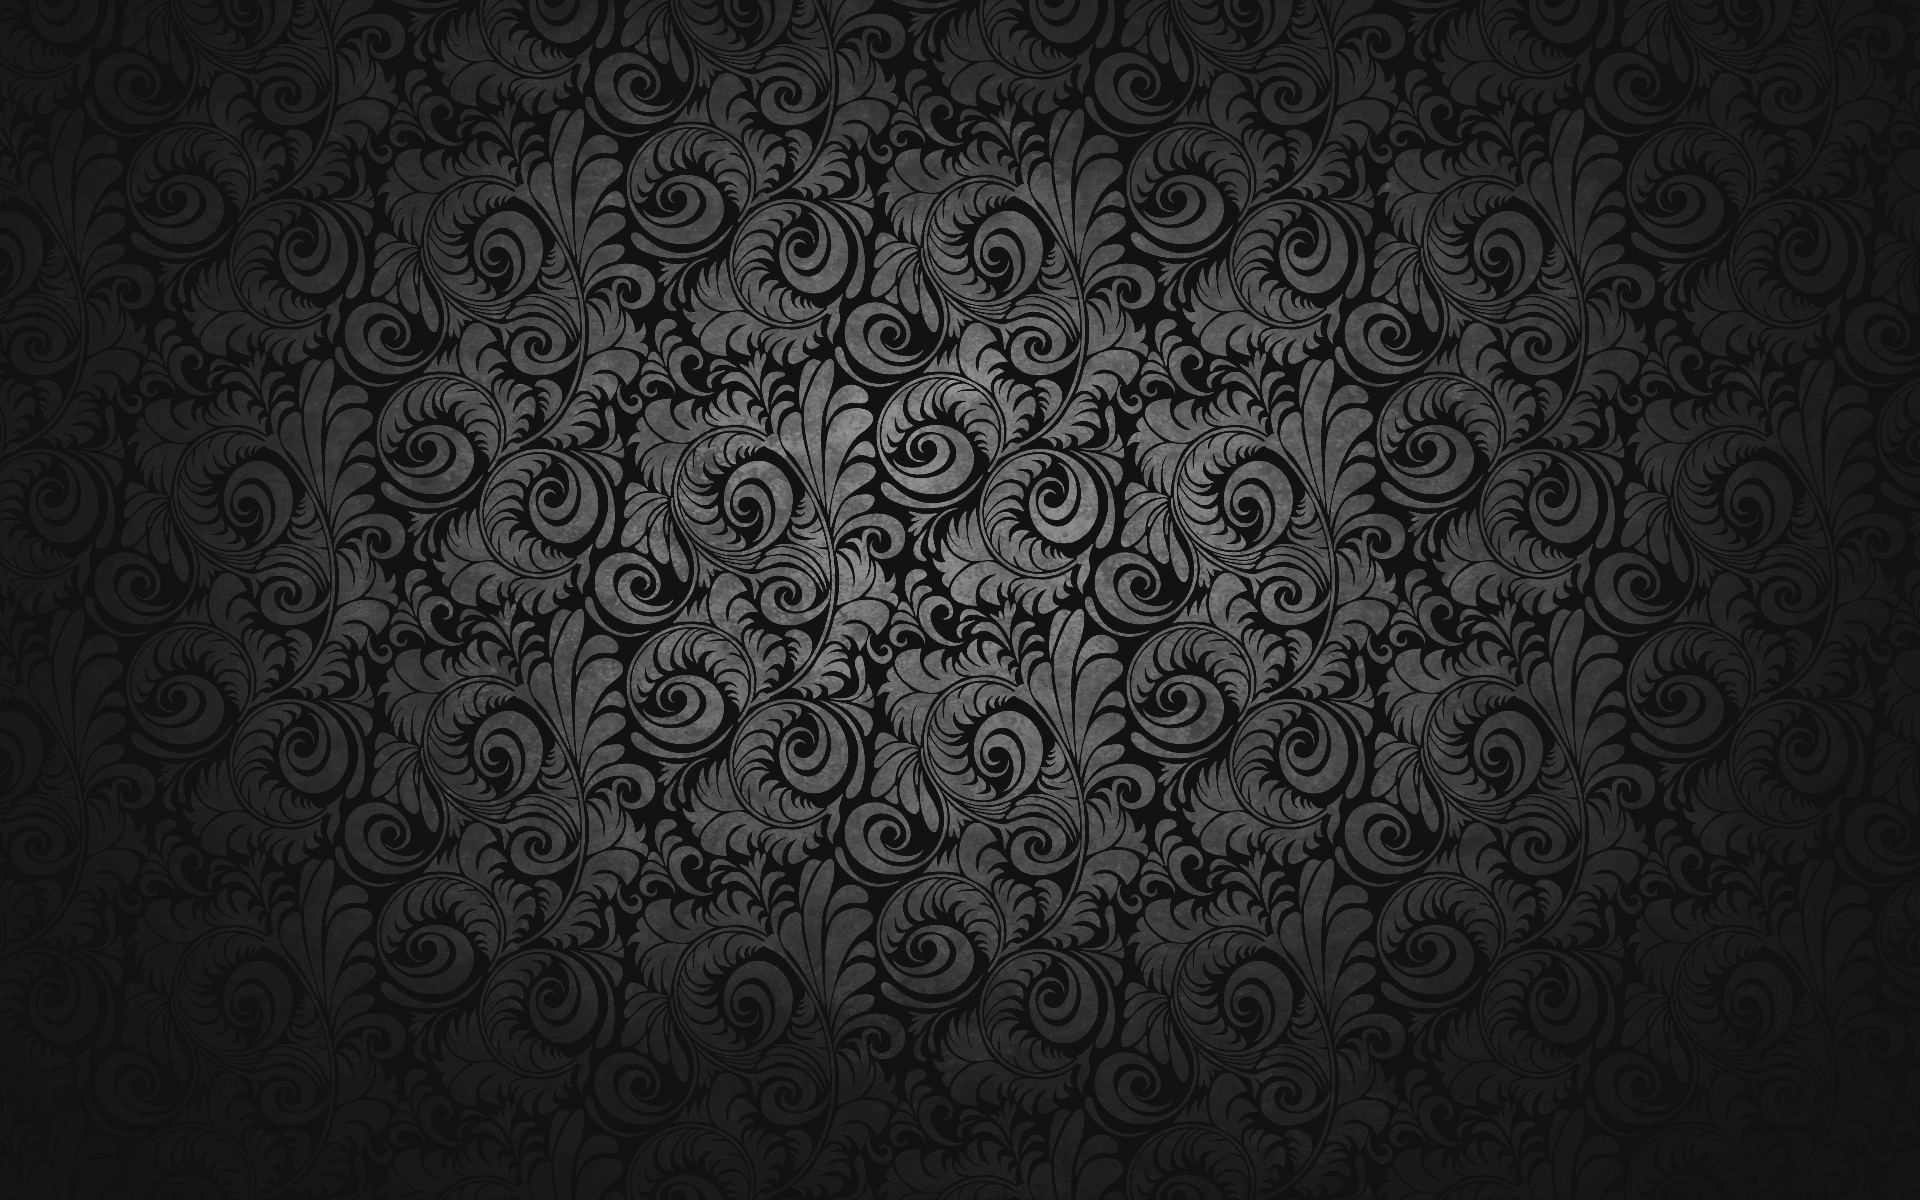 wallpapers, black wall, Flowers, photo, download, free, without payment